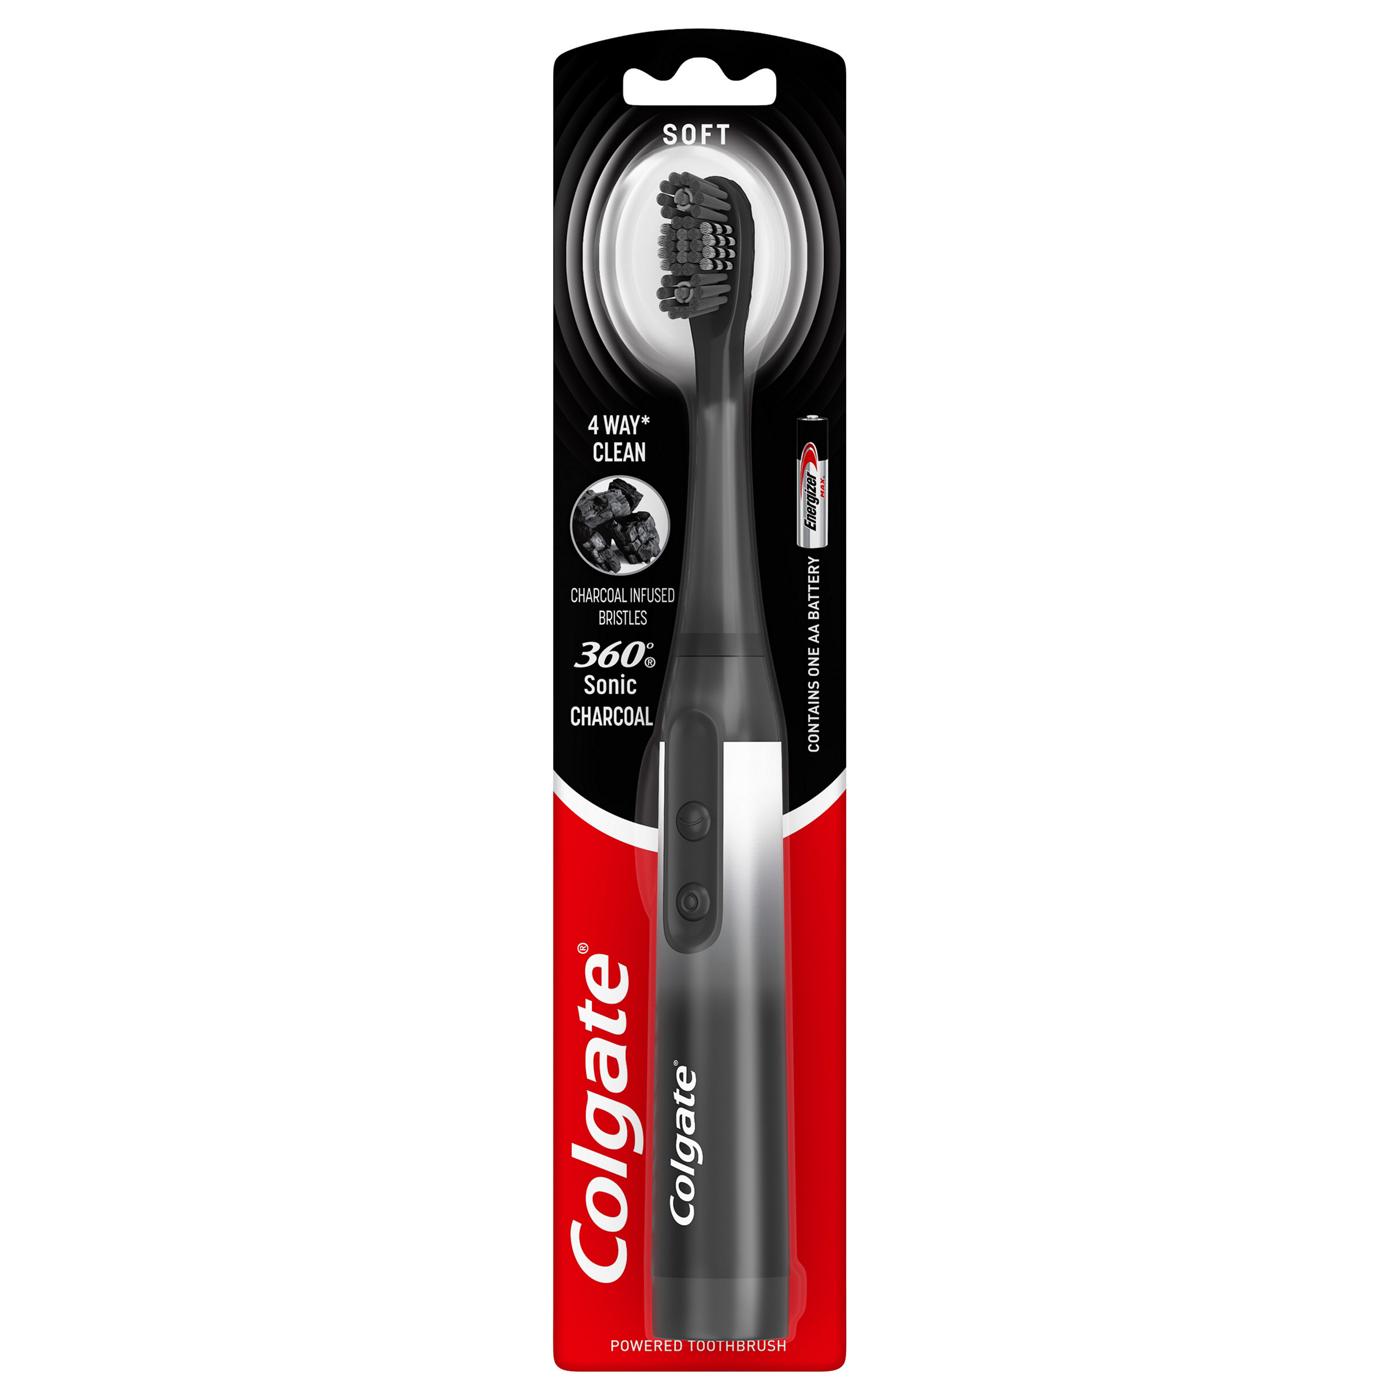 Colgate 360 Sonic Charcoal Power Toothbrush - Soft; image 1 of 9